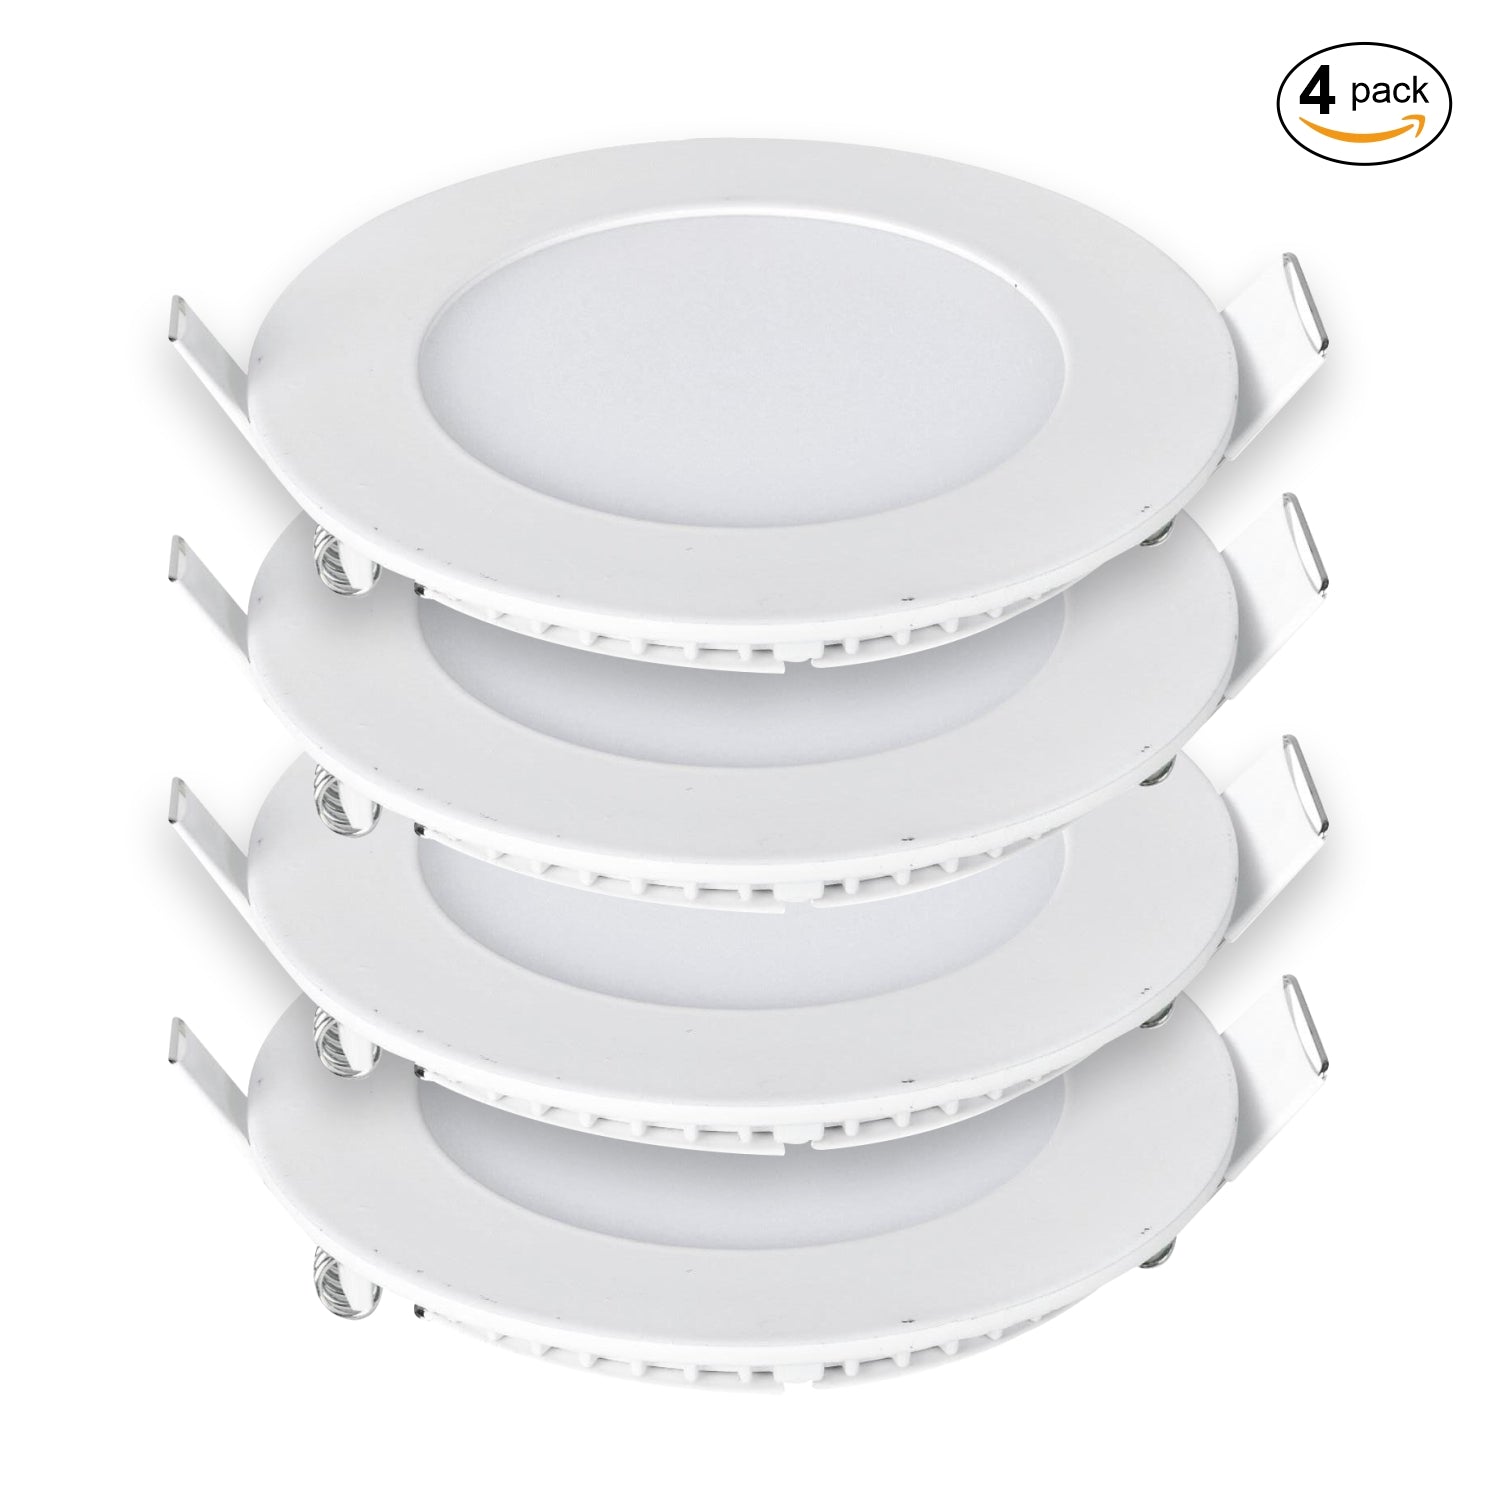 Pack of 4 12W Recessed Round LED Downlight Mini Panel 175mm Diameter, 160mm Hole Size, CE Driver, 3000K, 20000 Hours Long Life